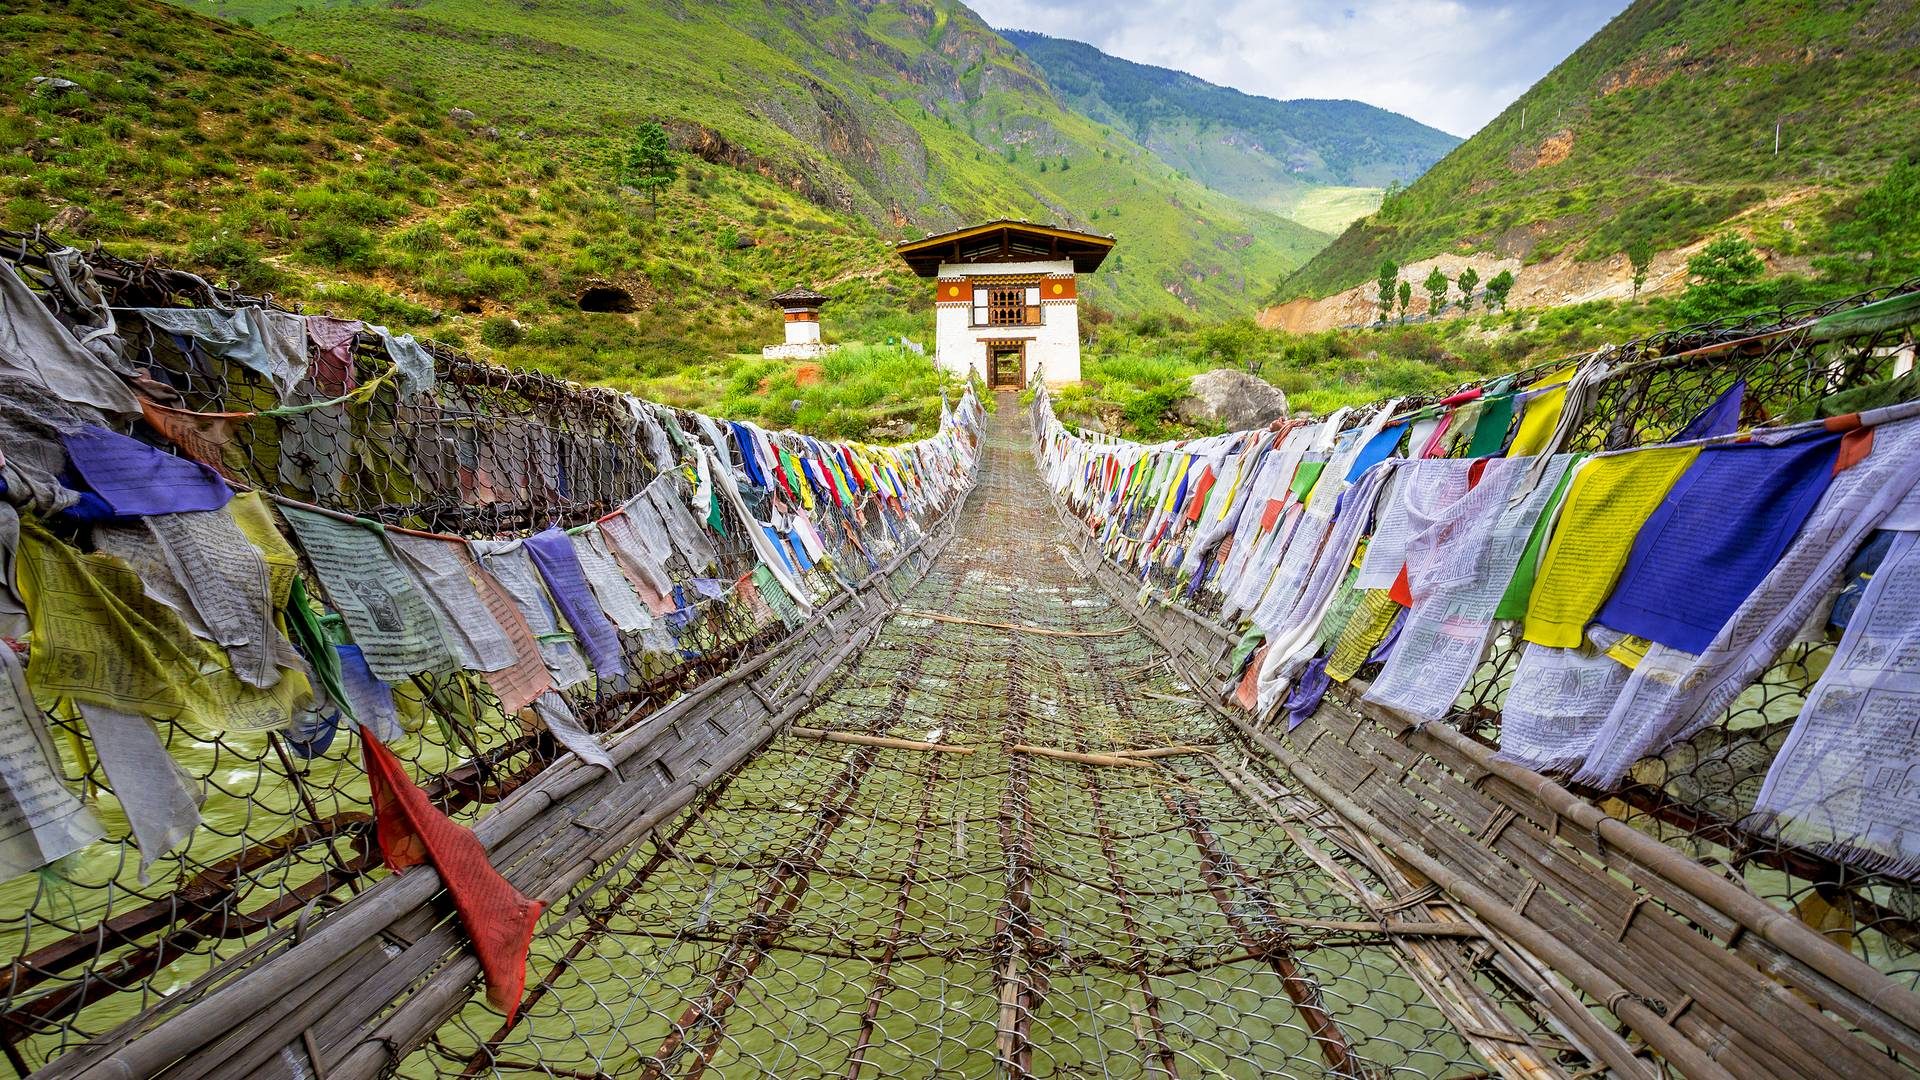 Bhutan Travel Guide: Visit These 14 Beautiful Places